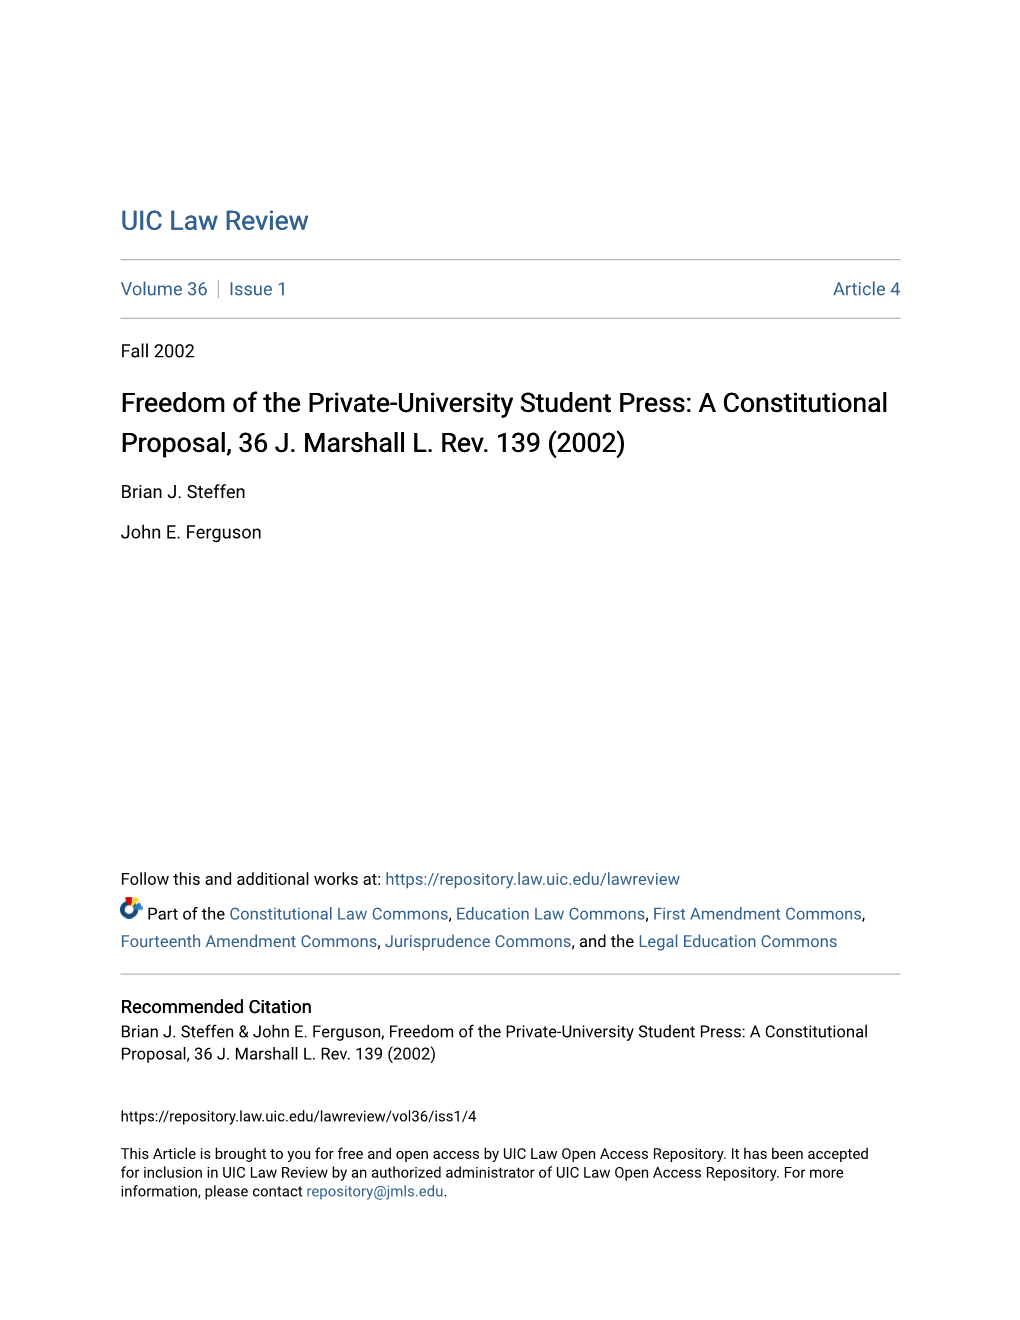 Freedom of the Private-University Student Press: a Constitutional Proposal, 36 J